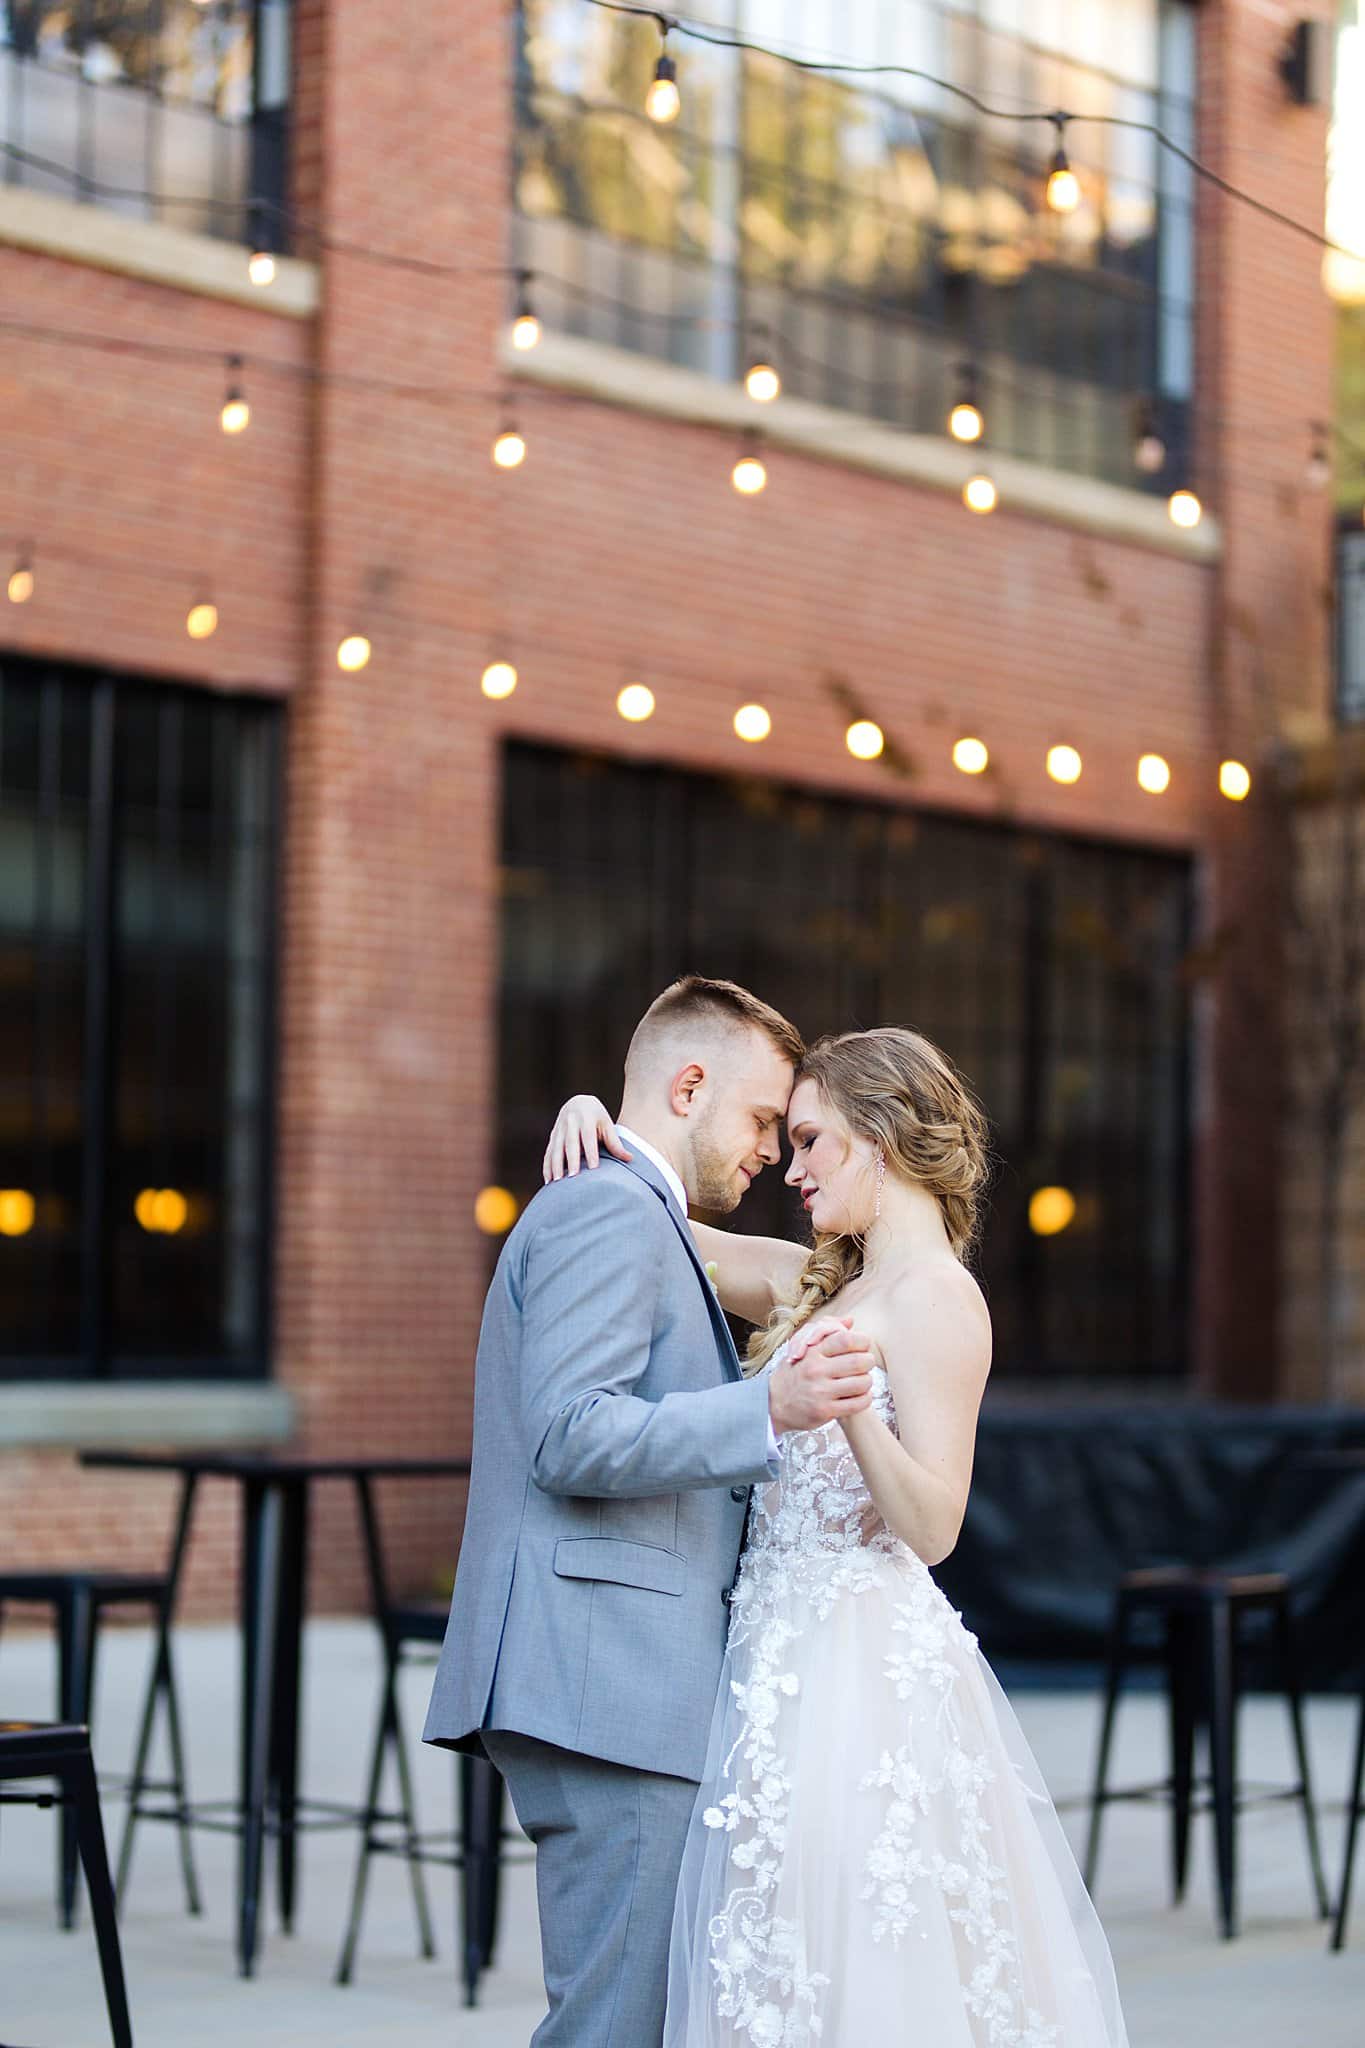 First Dance Pastel Charlottesville Virginia Wedding at The Wool Factory